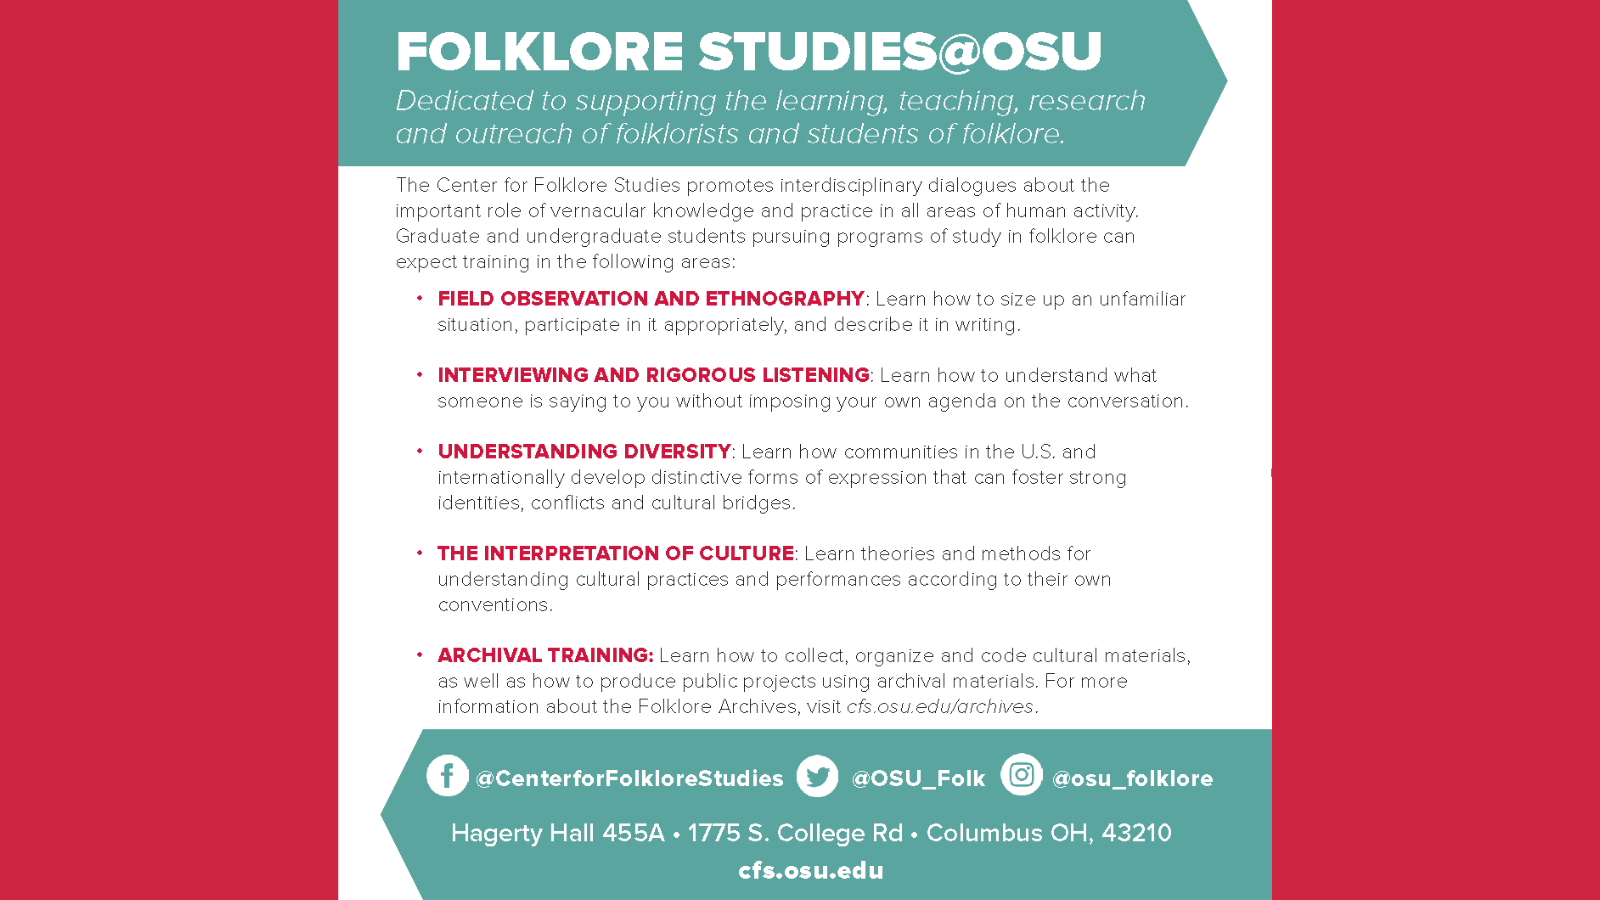 Folklore Studies @ OSU / The image includes a description of what Folklore Studies achieves at OSU. A full text description is provided in the caption.